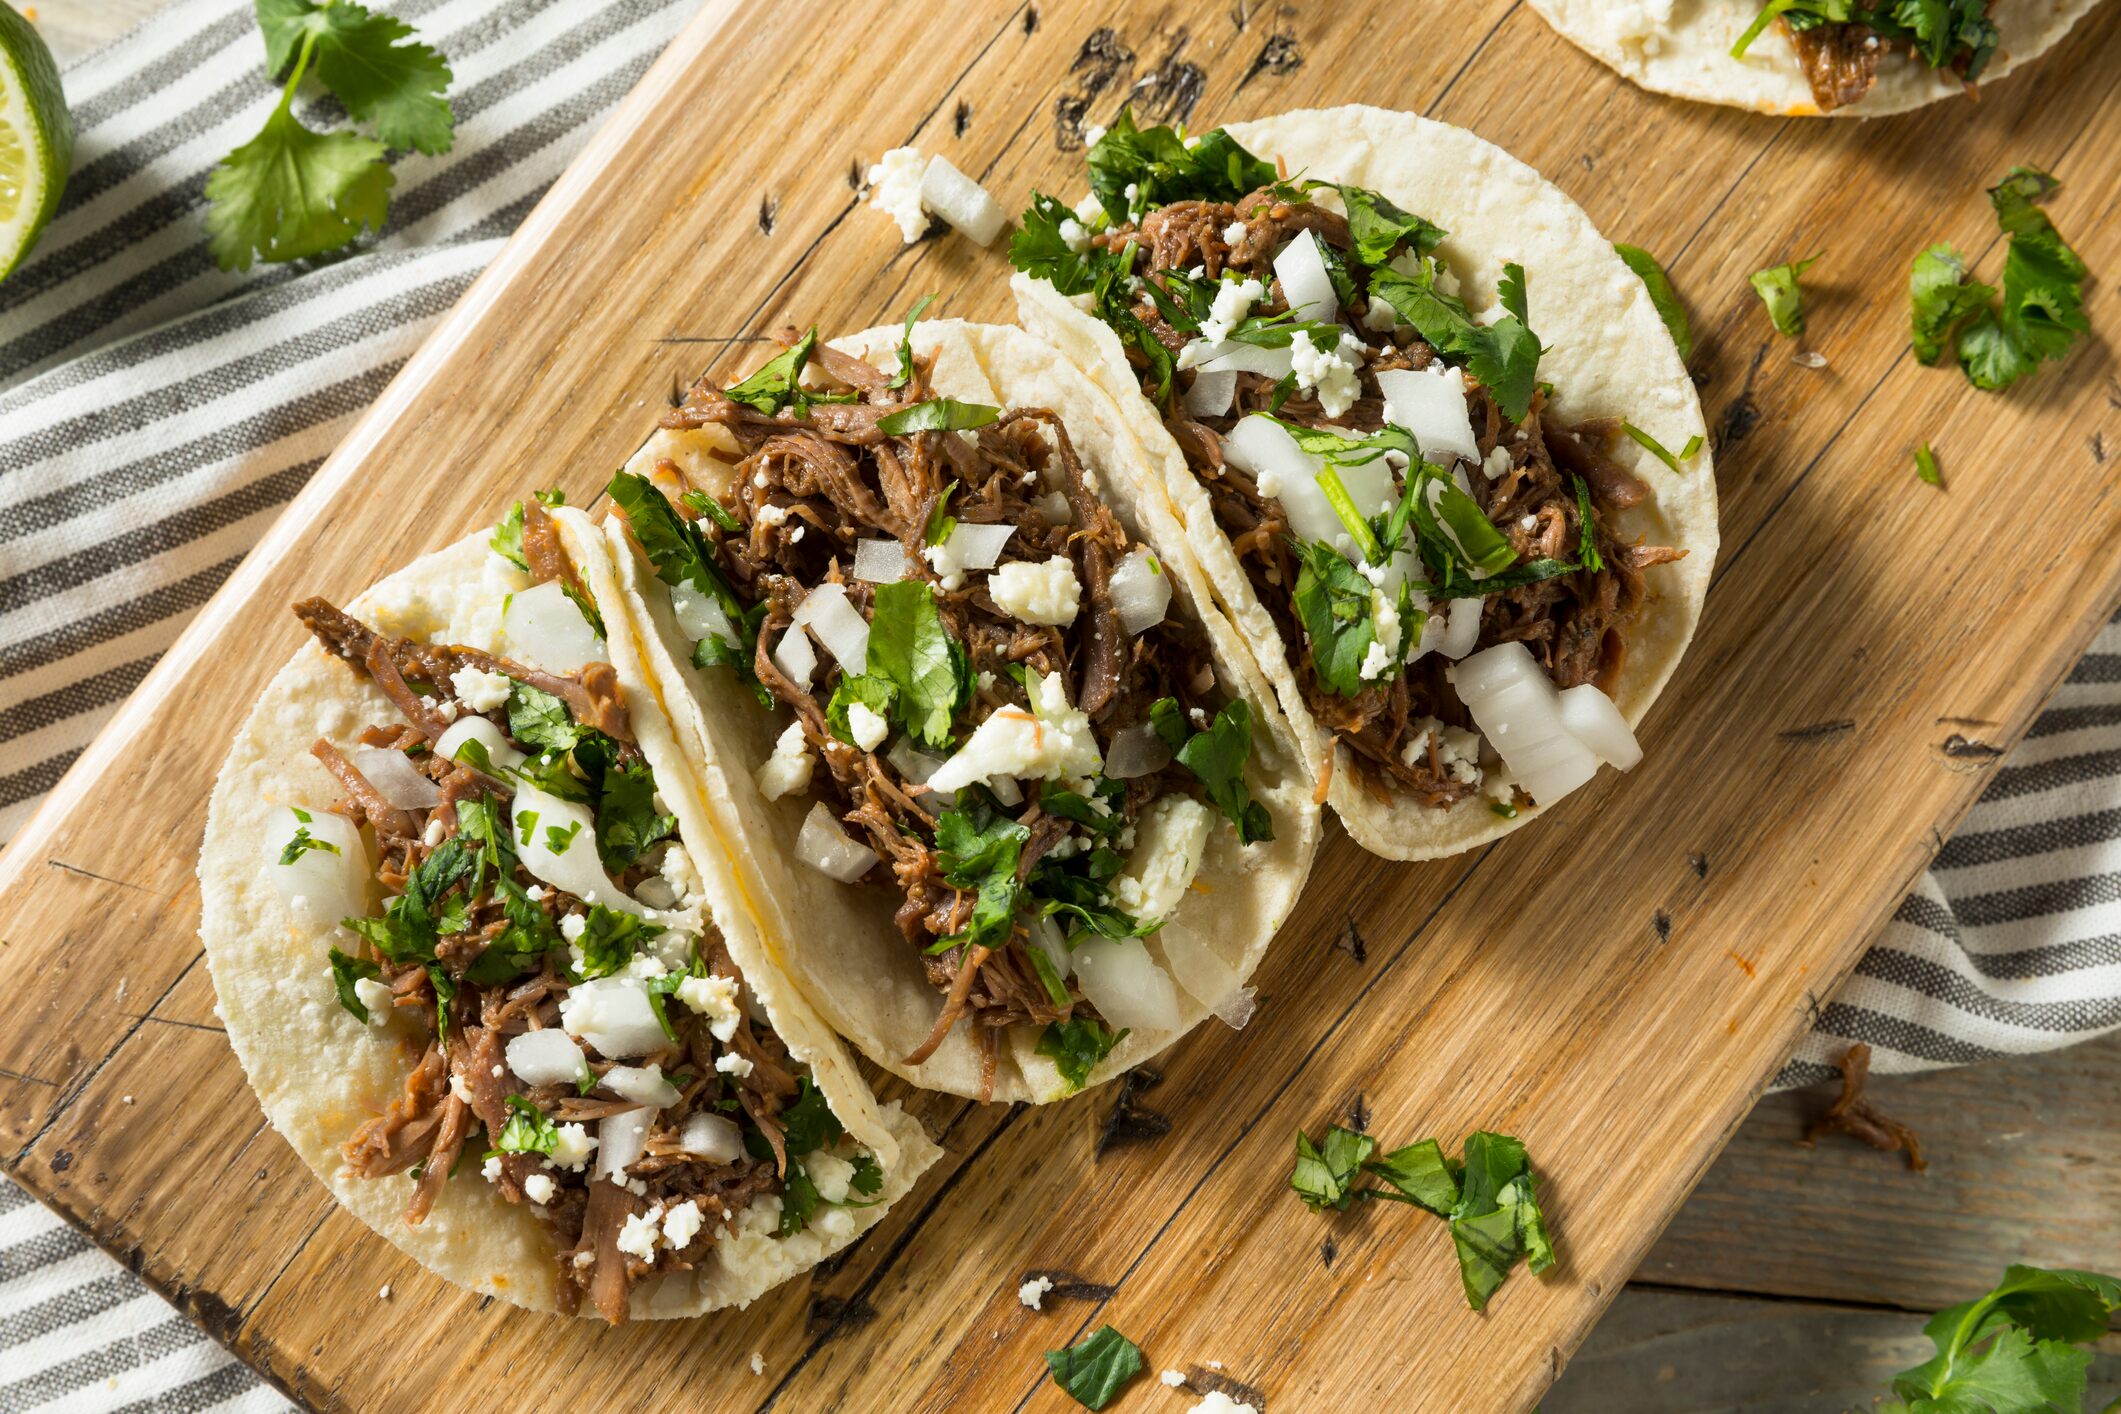 National Taco Day 2020 Deals: Where to go for free tacos and other special offers